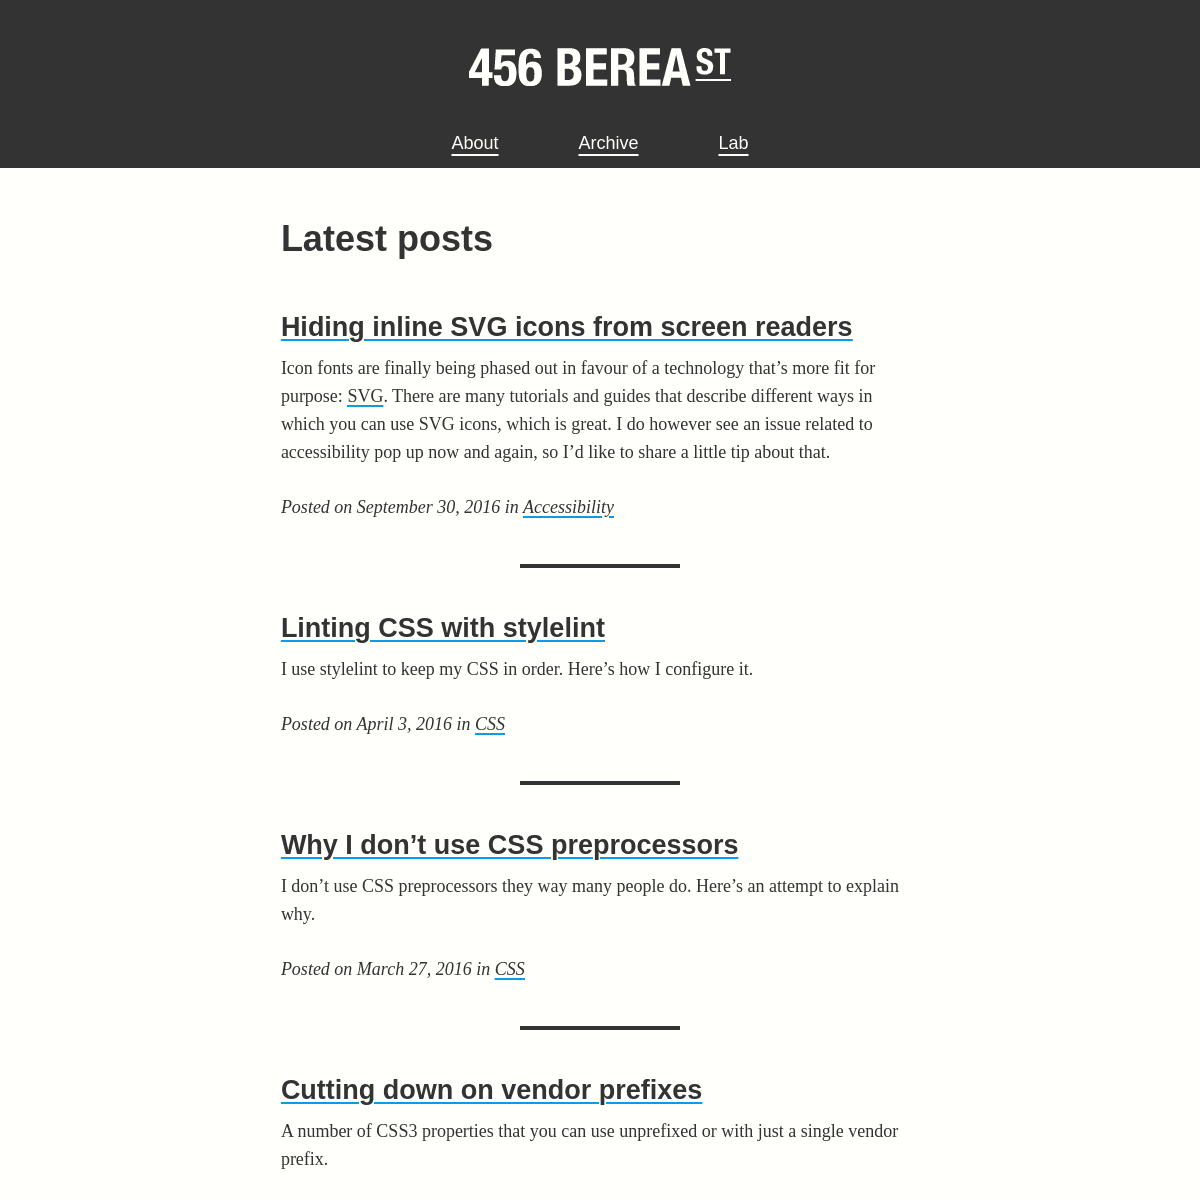 A complete backup of https://456bereastreet.com